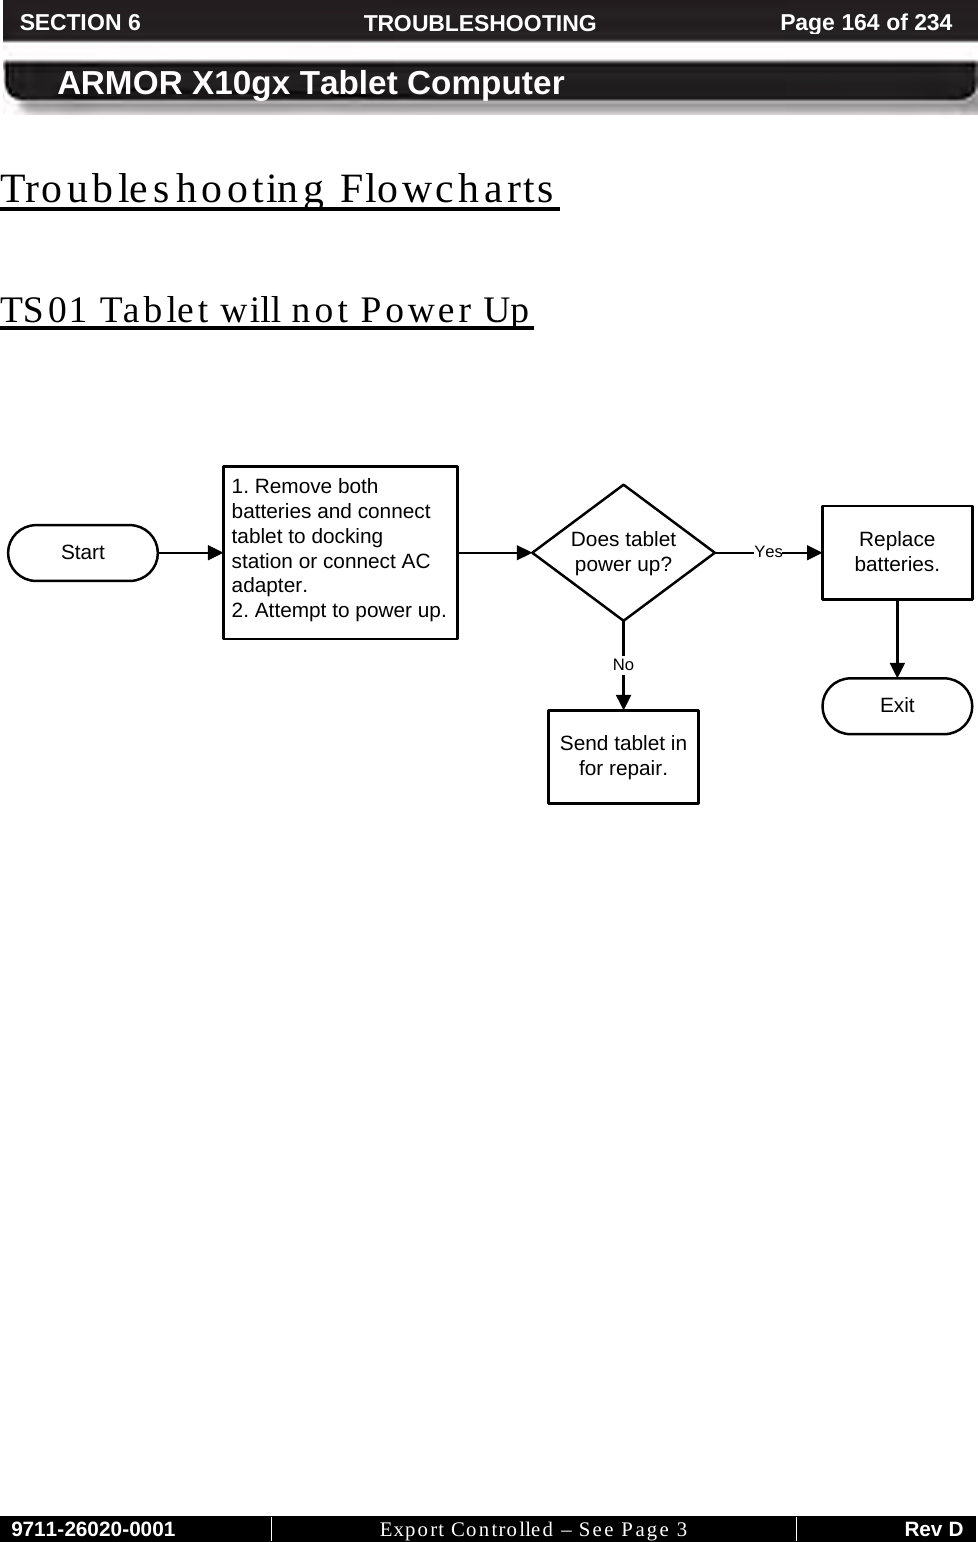     9711-26020-0001 Export Controlled – See Page 3 Rev D SECTION 6 TROUBLESHOOTING Page 164 of 234  ARMOR X10gx Tablet Computer Troubleshooting Flowcharts  TS01 Tablet will not Power Up          Start1. Remove both batteries and connect tablet to docking station or connect AC adapter.2. Attempt to power up.Does tablet power up? YesExitReplace batteries.NoSend tablet in for repair.